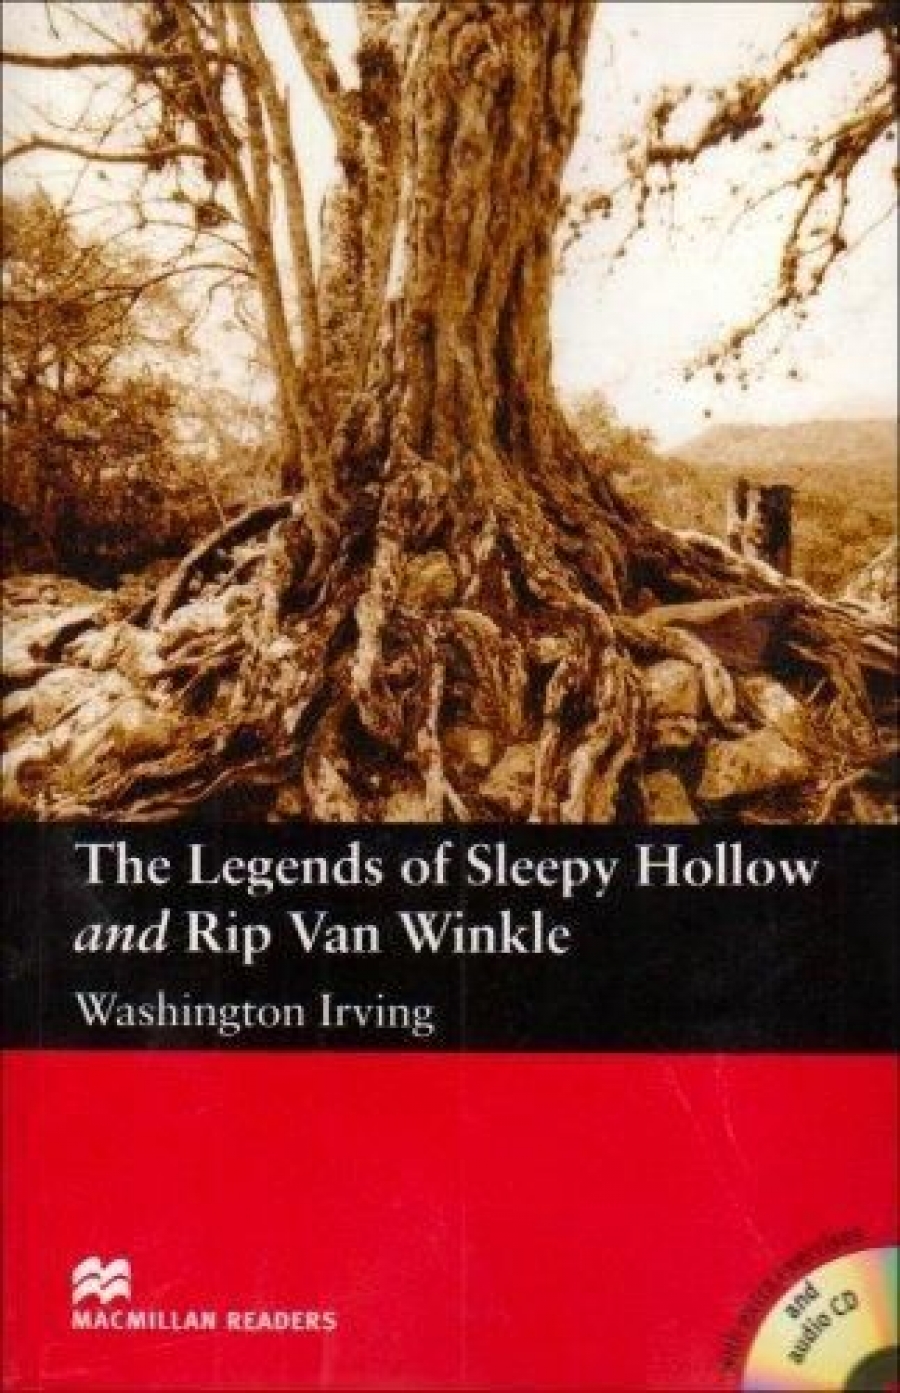 Washington Irving, retold by Anne Collins The Legends of Sleepy Hollow and Rip Van Winkle (with Audio CD) 